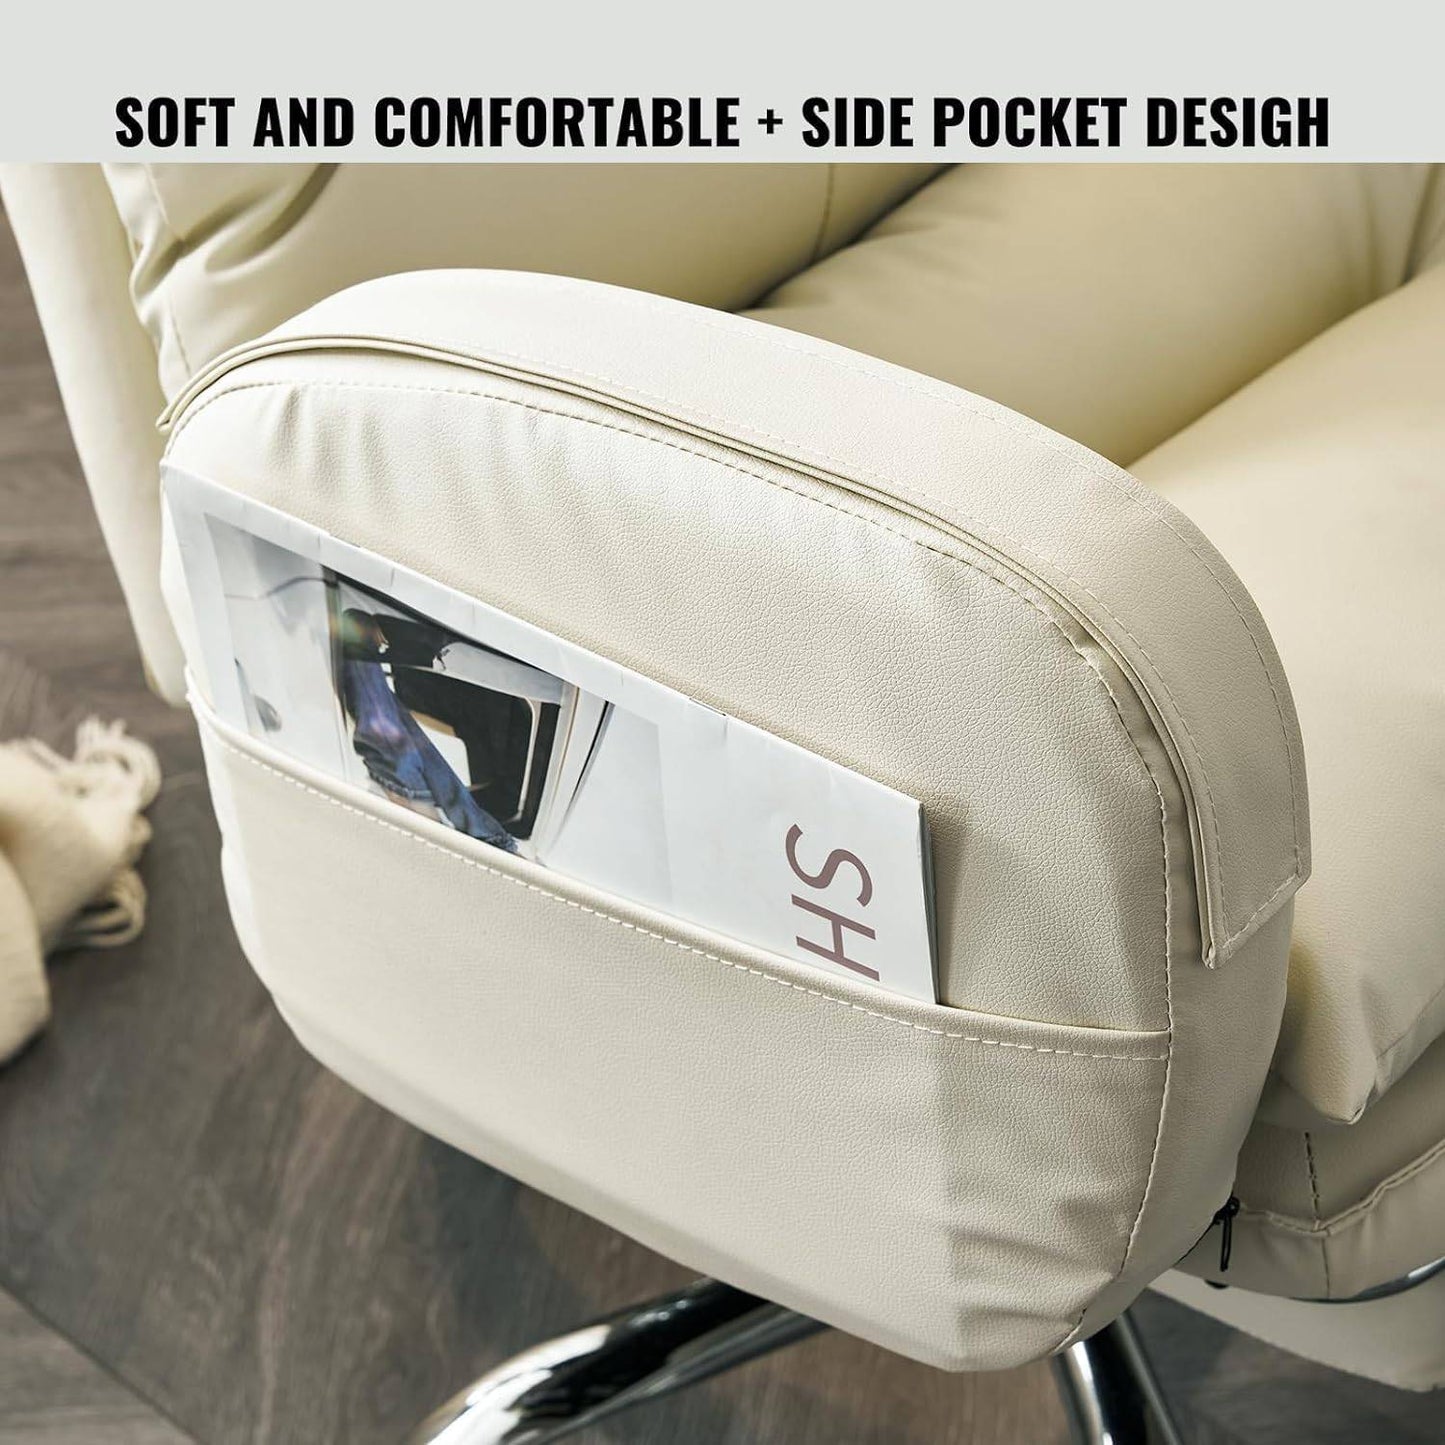 Home Office Chair with Footrest, High-Back PU Leather Computer Desk Chair, Executive Rolling Swivel Chairs with Leg Rest and Double Thick Cushion, White Office Chair (Cream White)